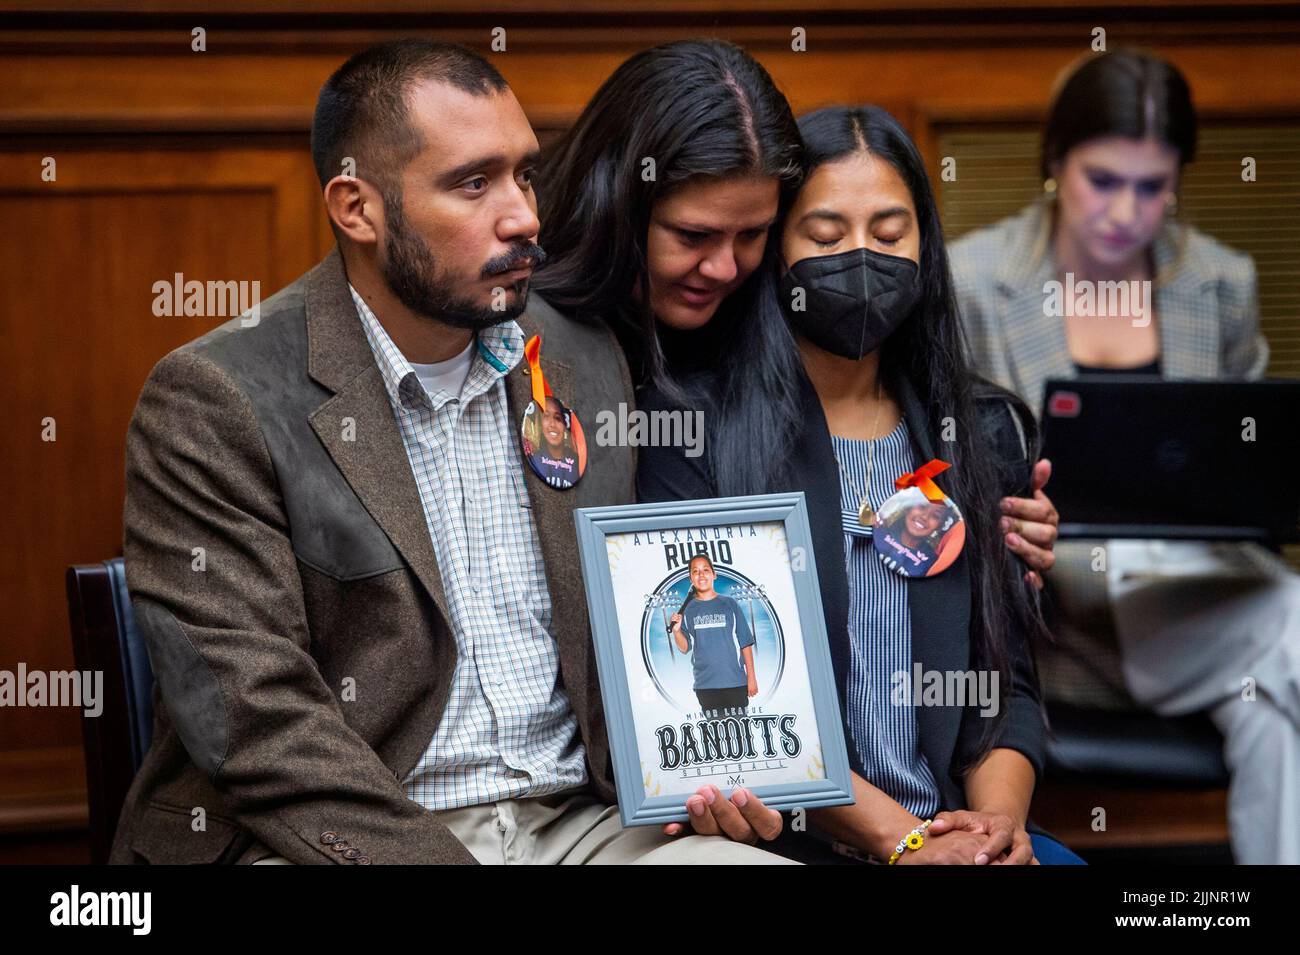 Gloria Cazares, center, whose nine year-old daughter Jacklyn was one of the children killed by a gunman at Robb Elementary School in Uvalde, Texas, comforts Felix Rubio, left, and Kimberly Rubio, right, whose daughter Alexandria Rubio was one of the children killed by a gunman at Robb Elementary School in Uvalde, Texas, during a House Committee on Oversight and Reform hearing âExamining the Practices and Profits of Gun Manufacturersâ in the Rayburn House Office Building in Washington, DC, July 27, 2022. Credit: Rod Lamkey/CNP Stock Photo